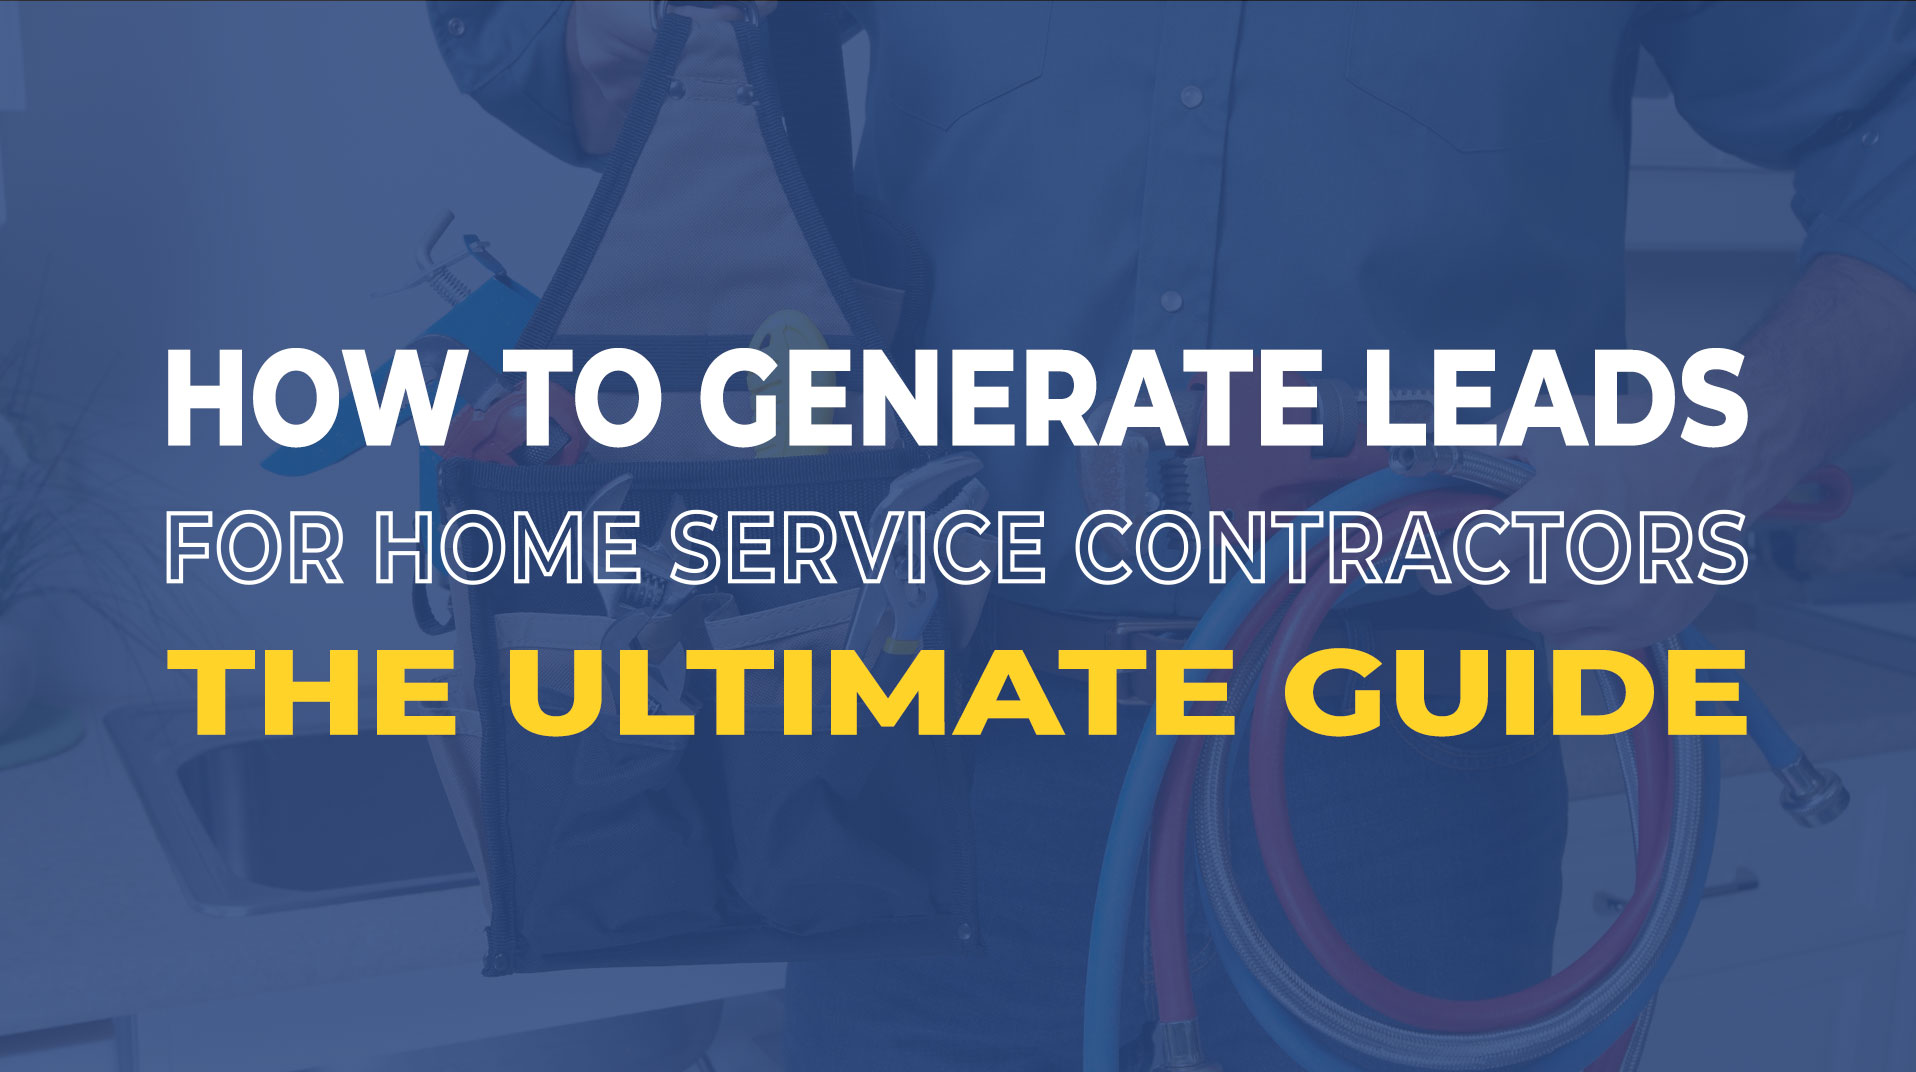 How to Generate Leads for Home Service Contractors?